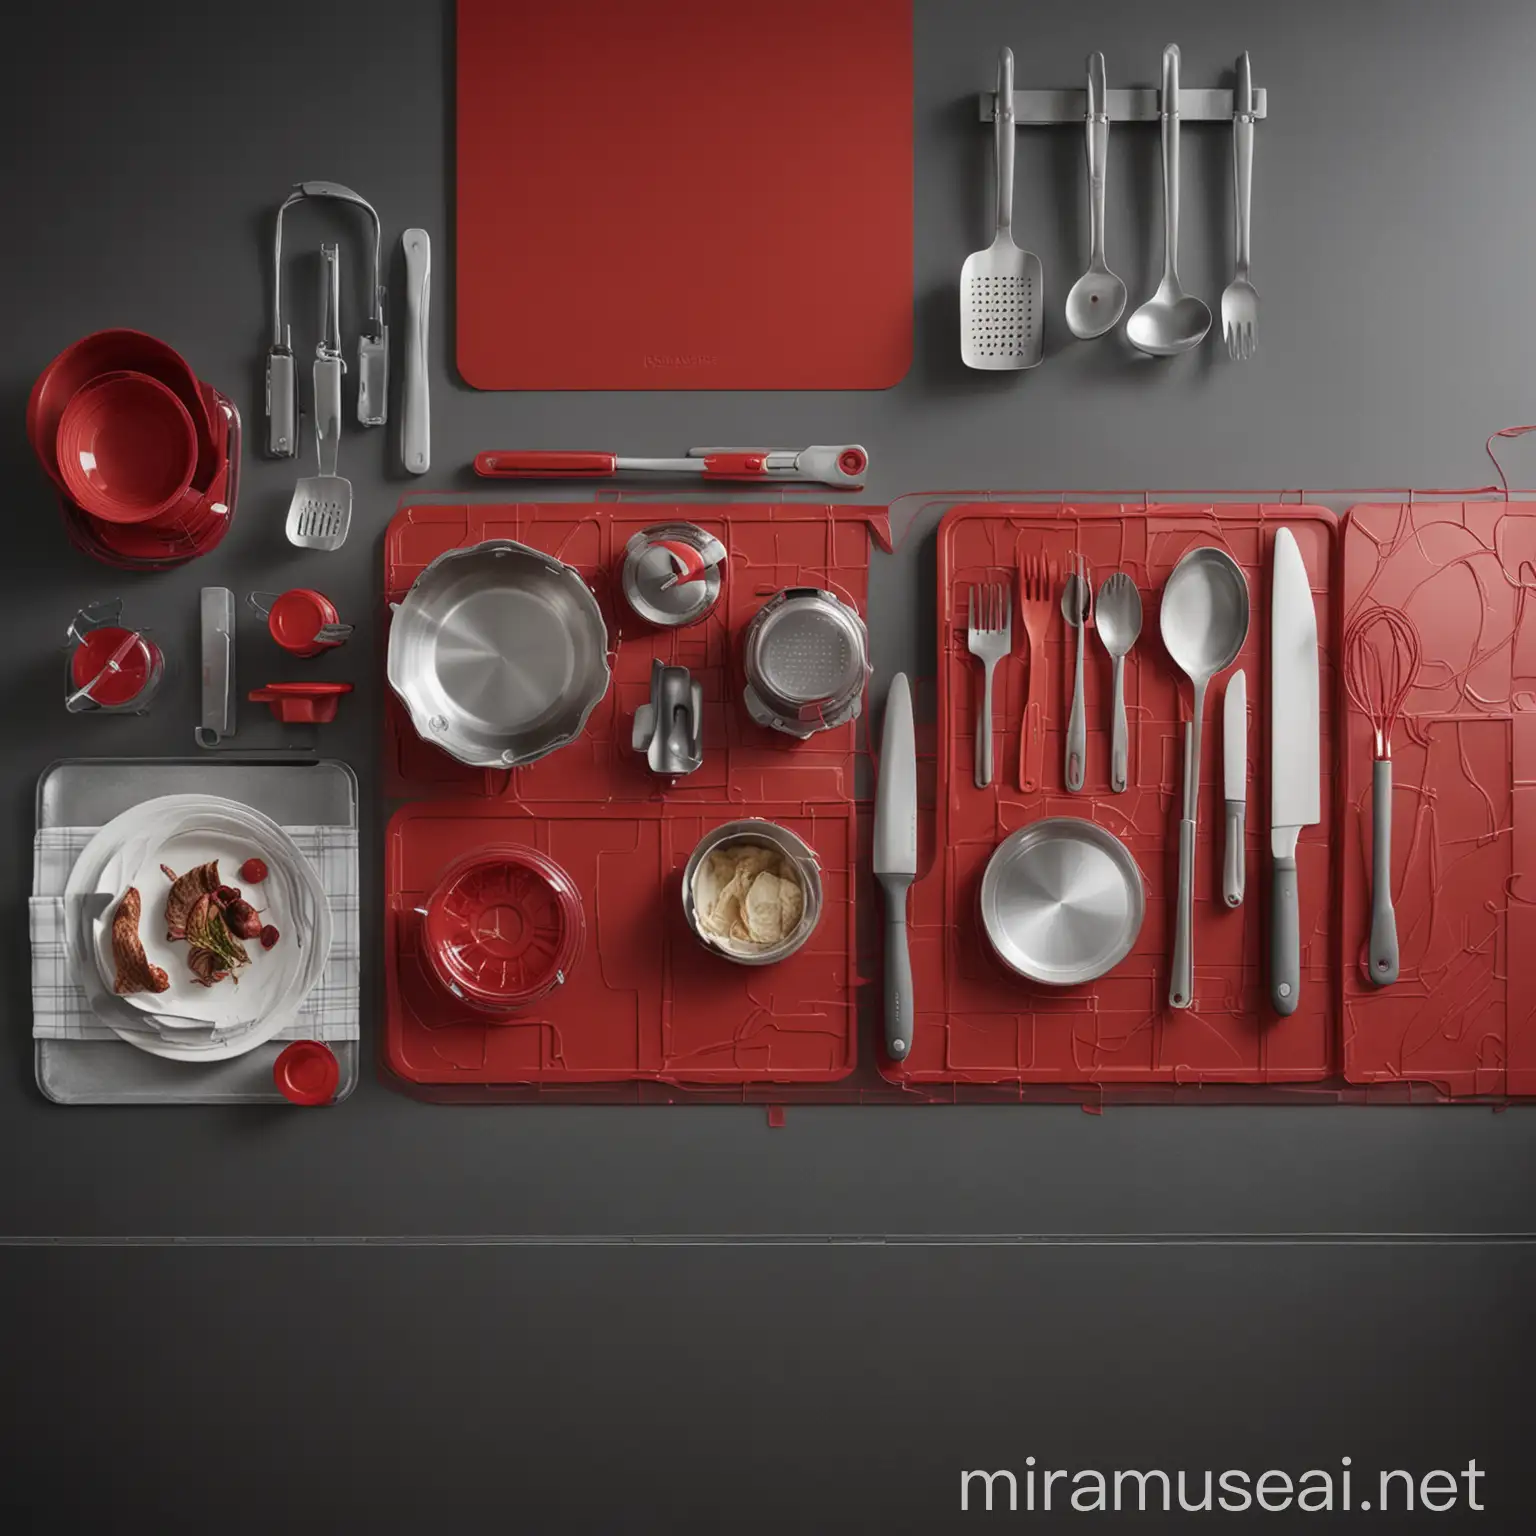 Create a moodboard showcasing a couple cooking together at home, using a vibrant palette of metallic red and gray tones. Incorporate high-quality plastic products and soft lines, emphasizing modern technological elements and security features for a sense of innovation and simplicity.